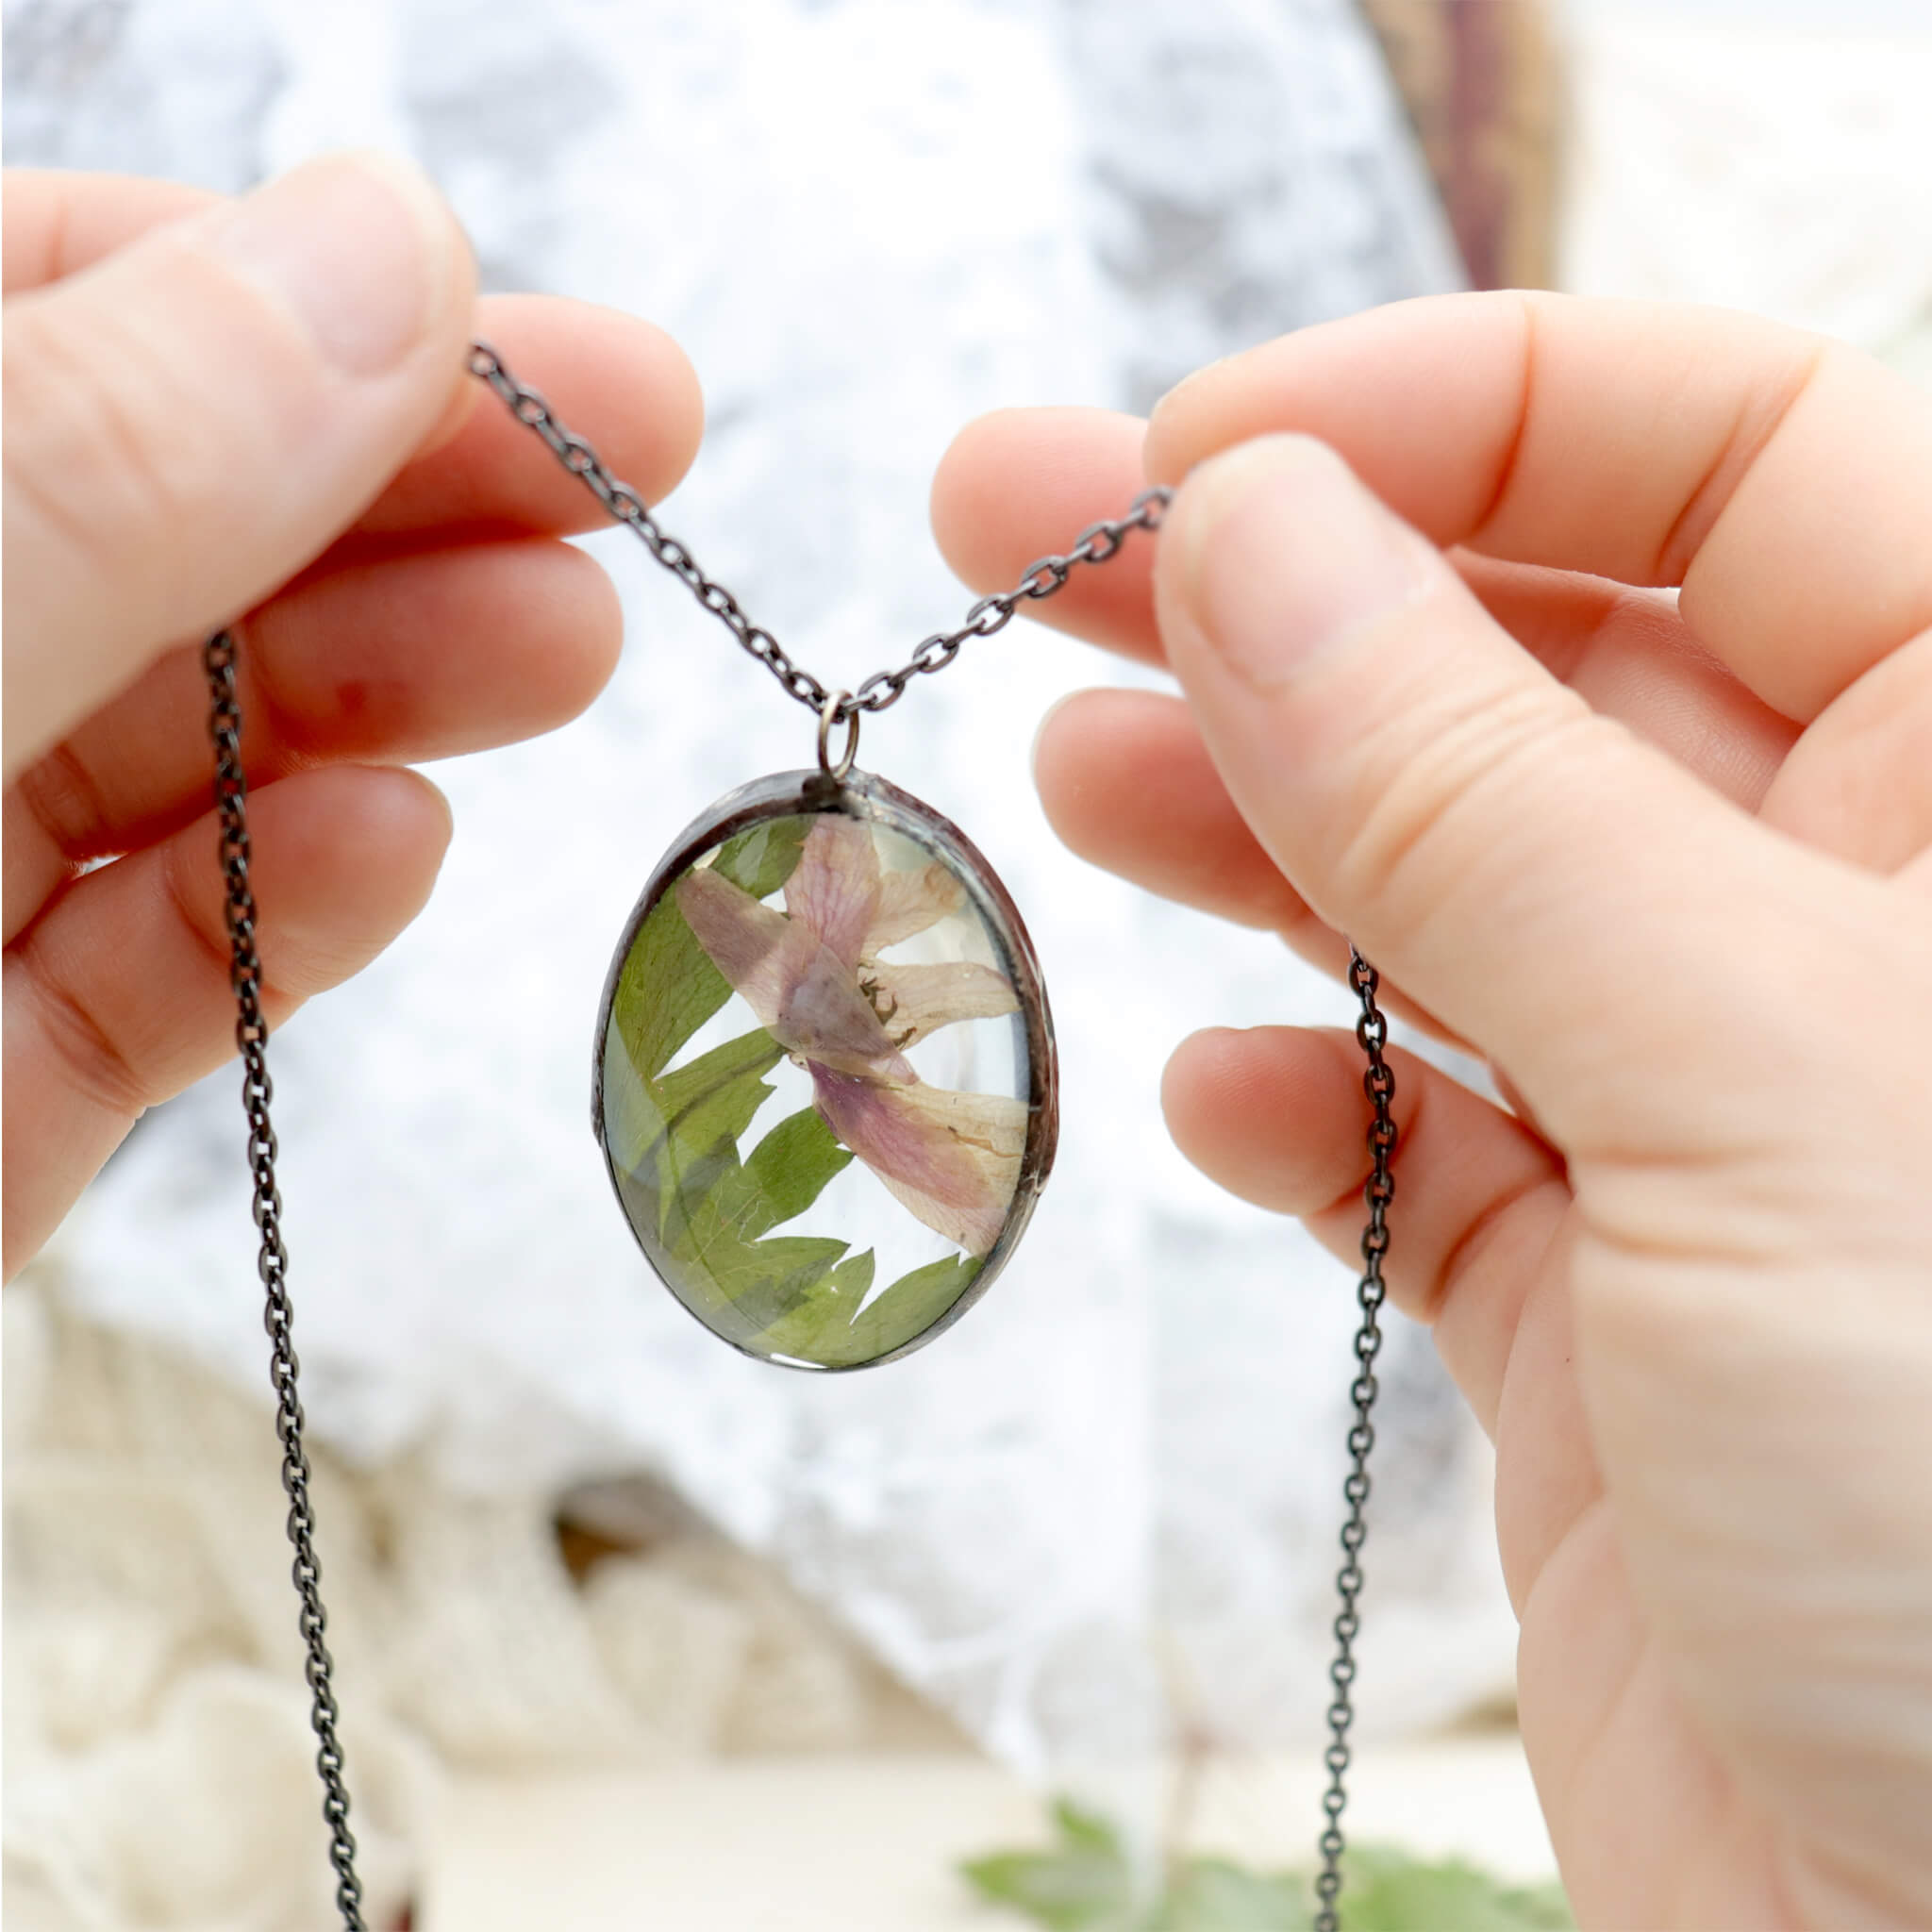 Hands holding oval shaped necklace featuring pink pressed flowers with green leaves